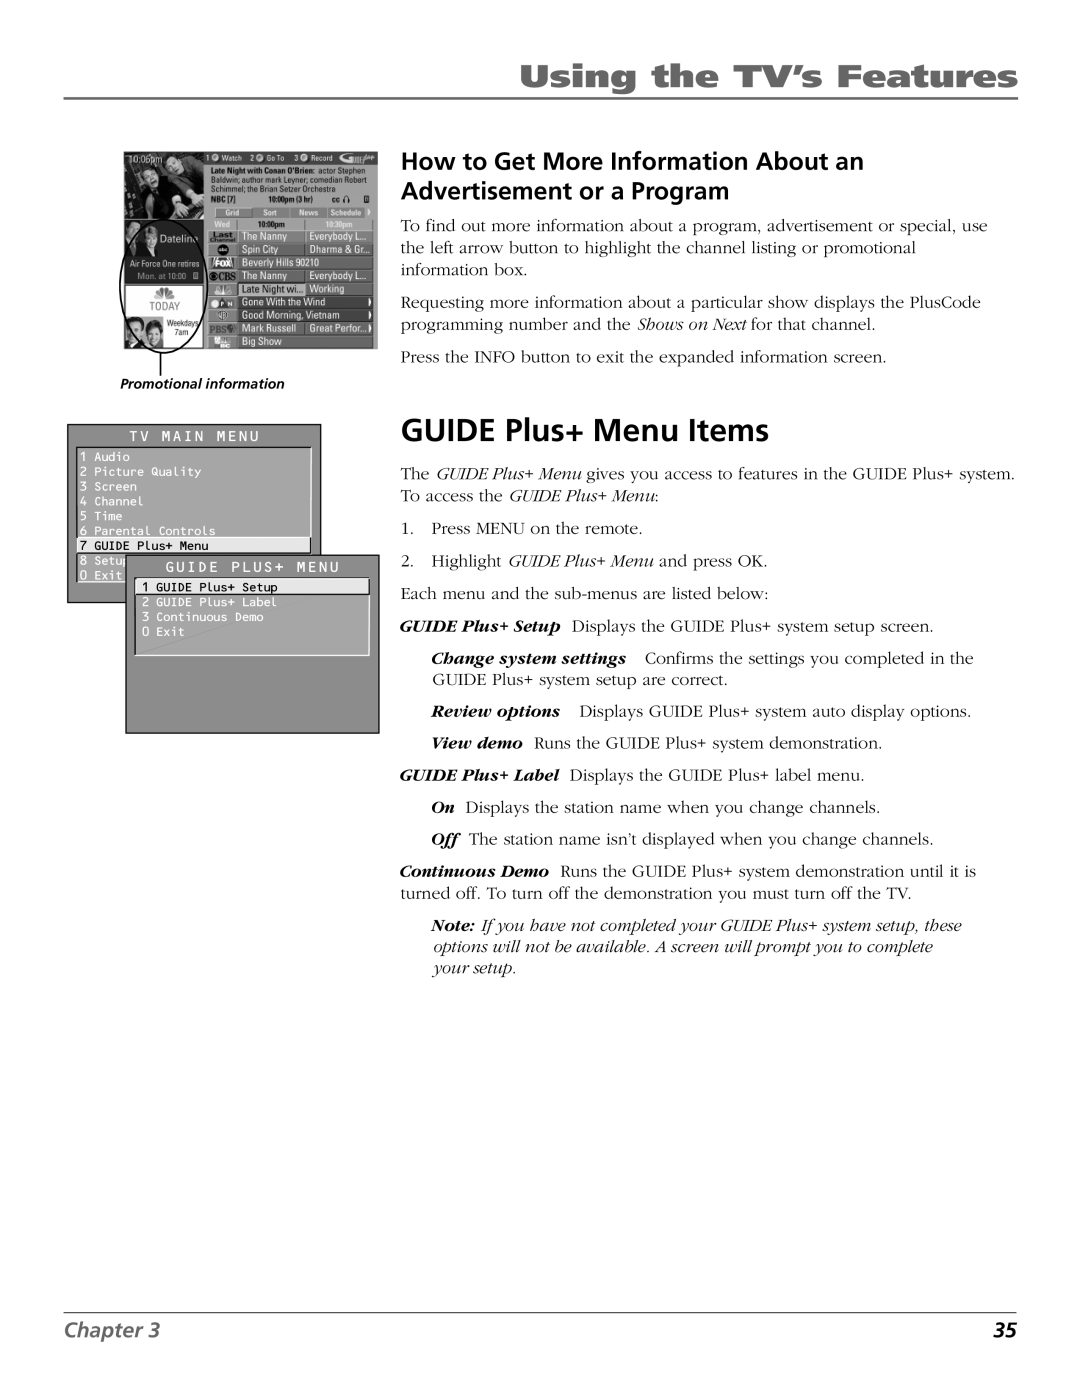 RCA F27669 manual GUIDE Plus+ Menu Items, How to Get More Information About an Advertisement or a Program, Chapter 